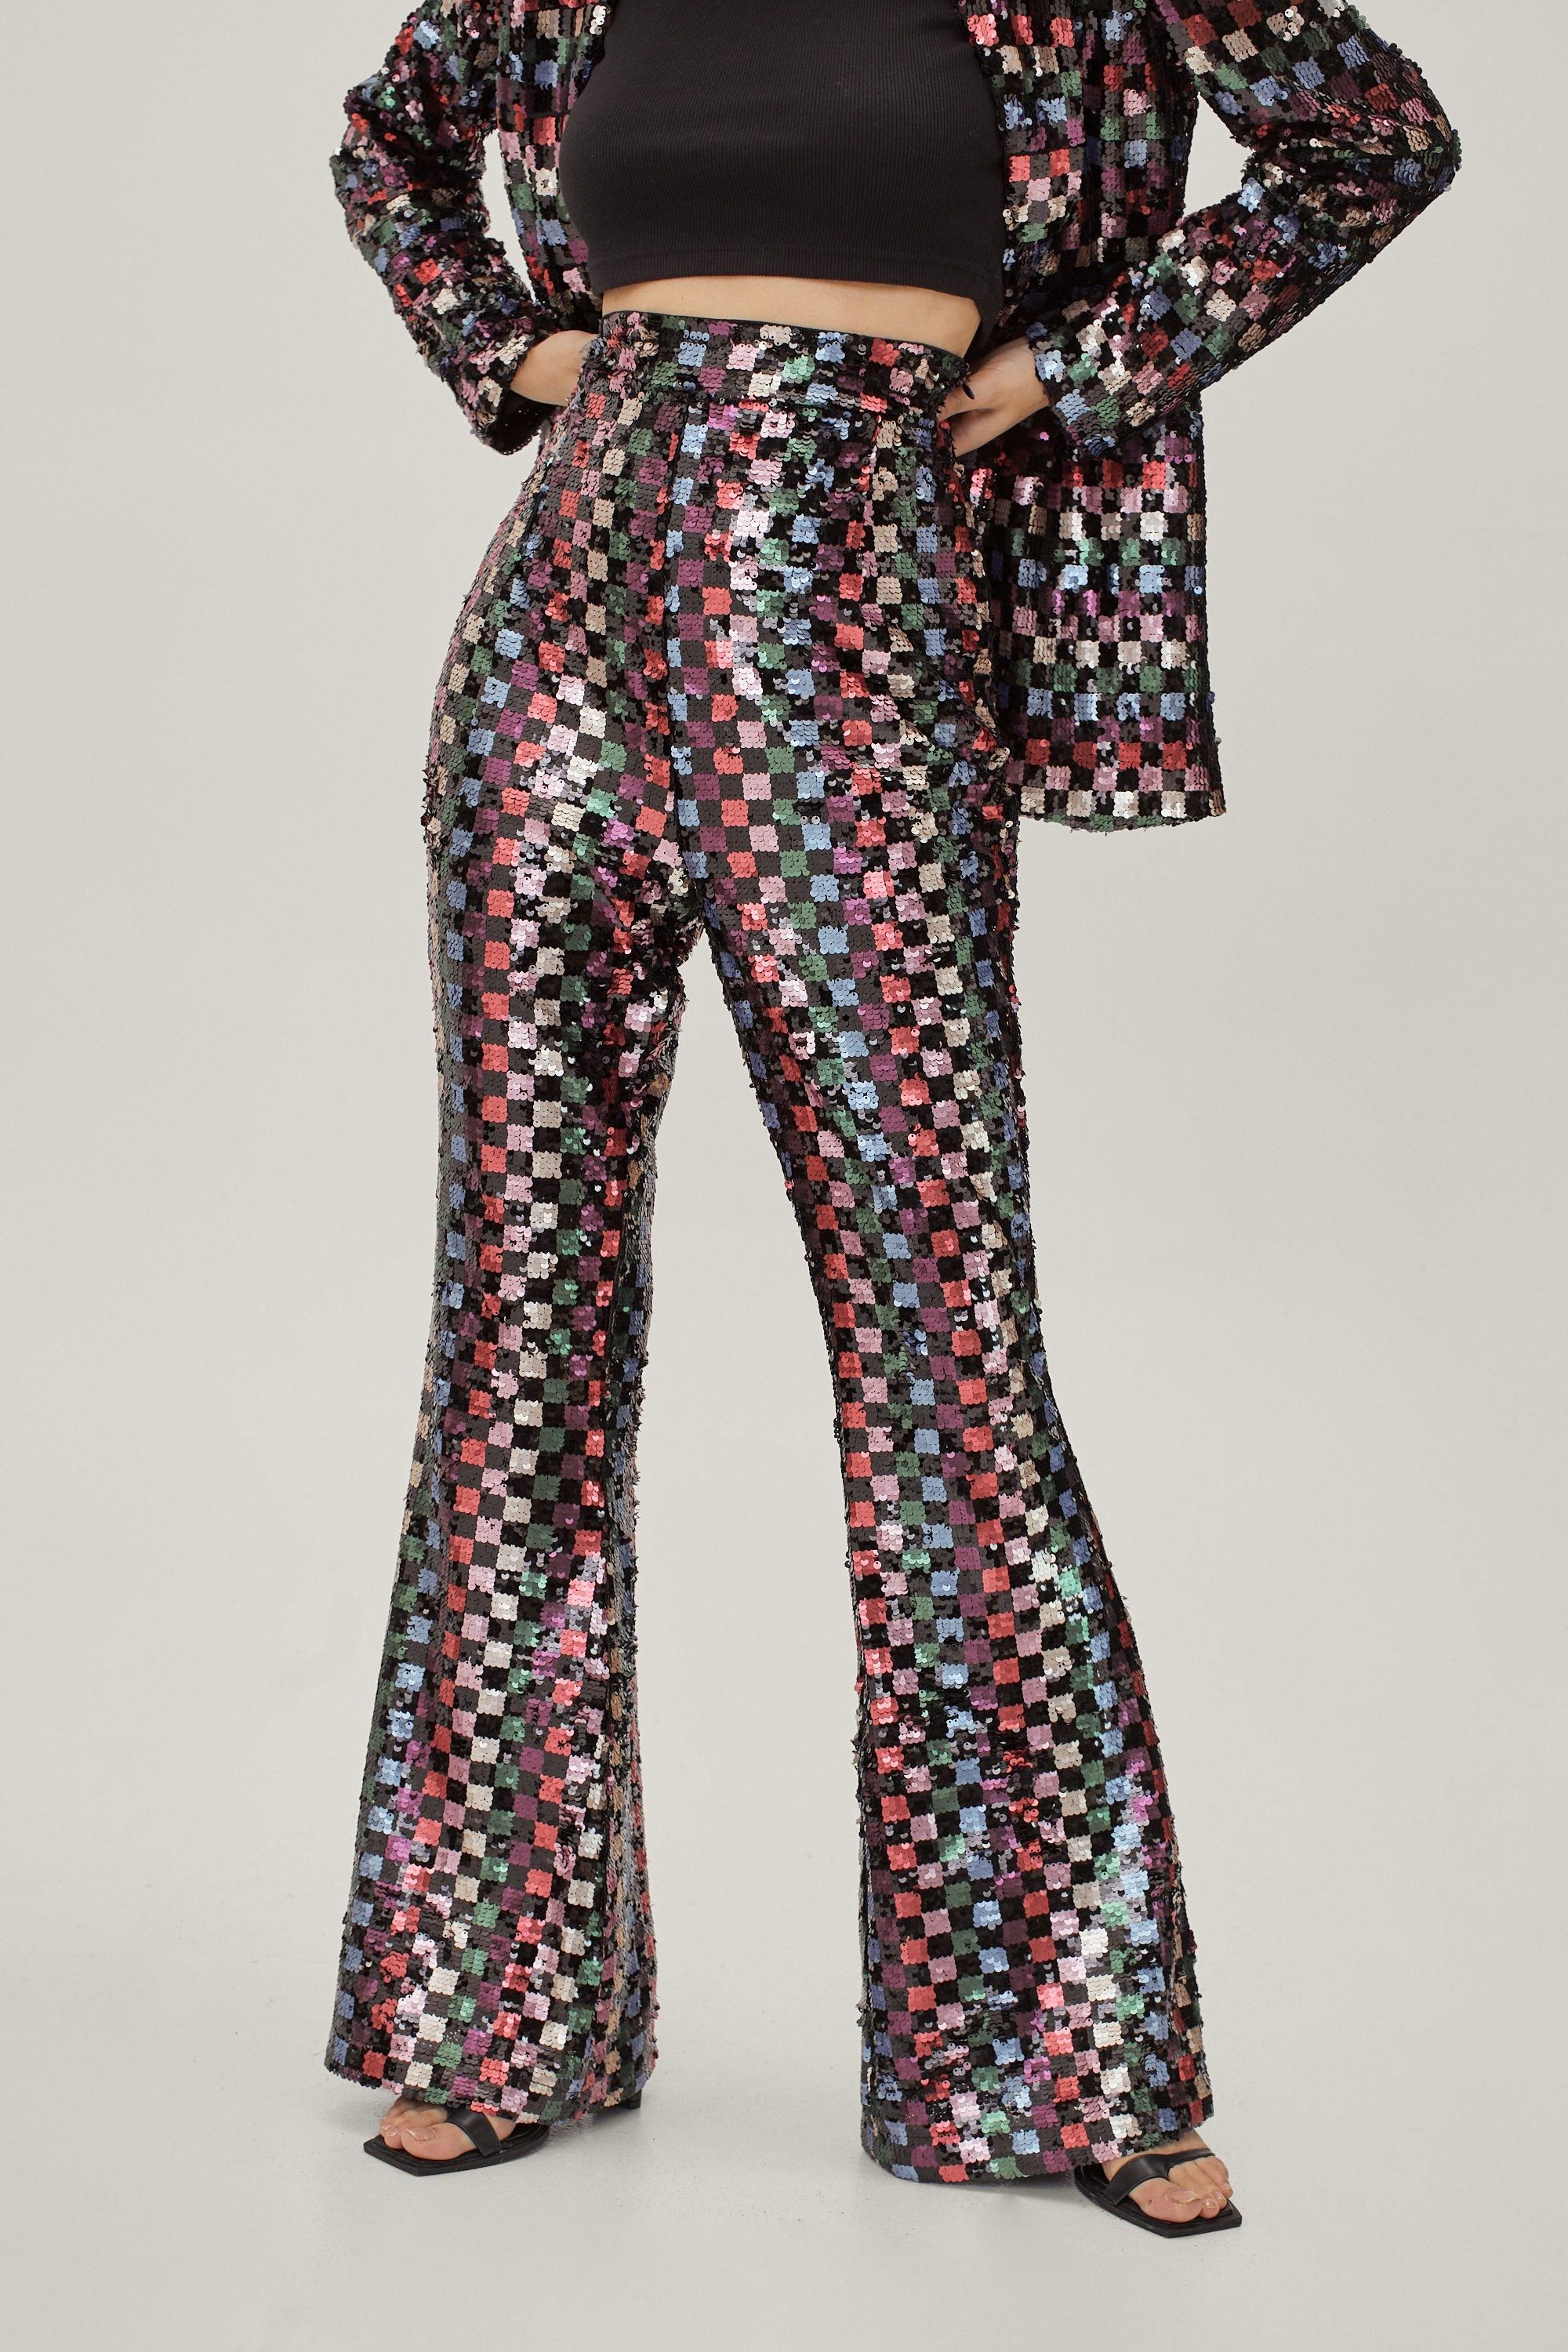 Checkerboard Sequin High Waisted Sequin Flare Pants | Nasty Gal (US)